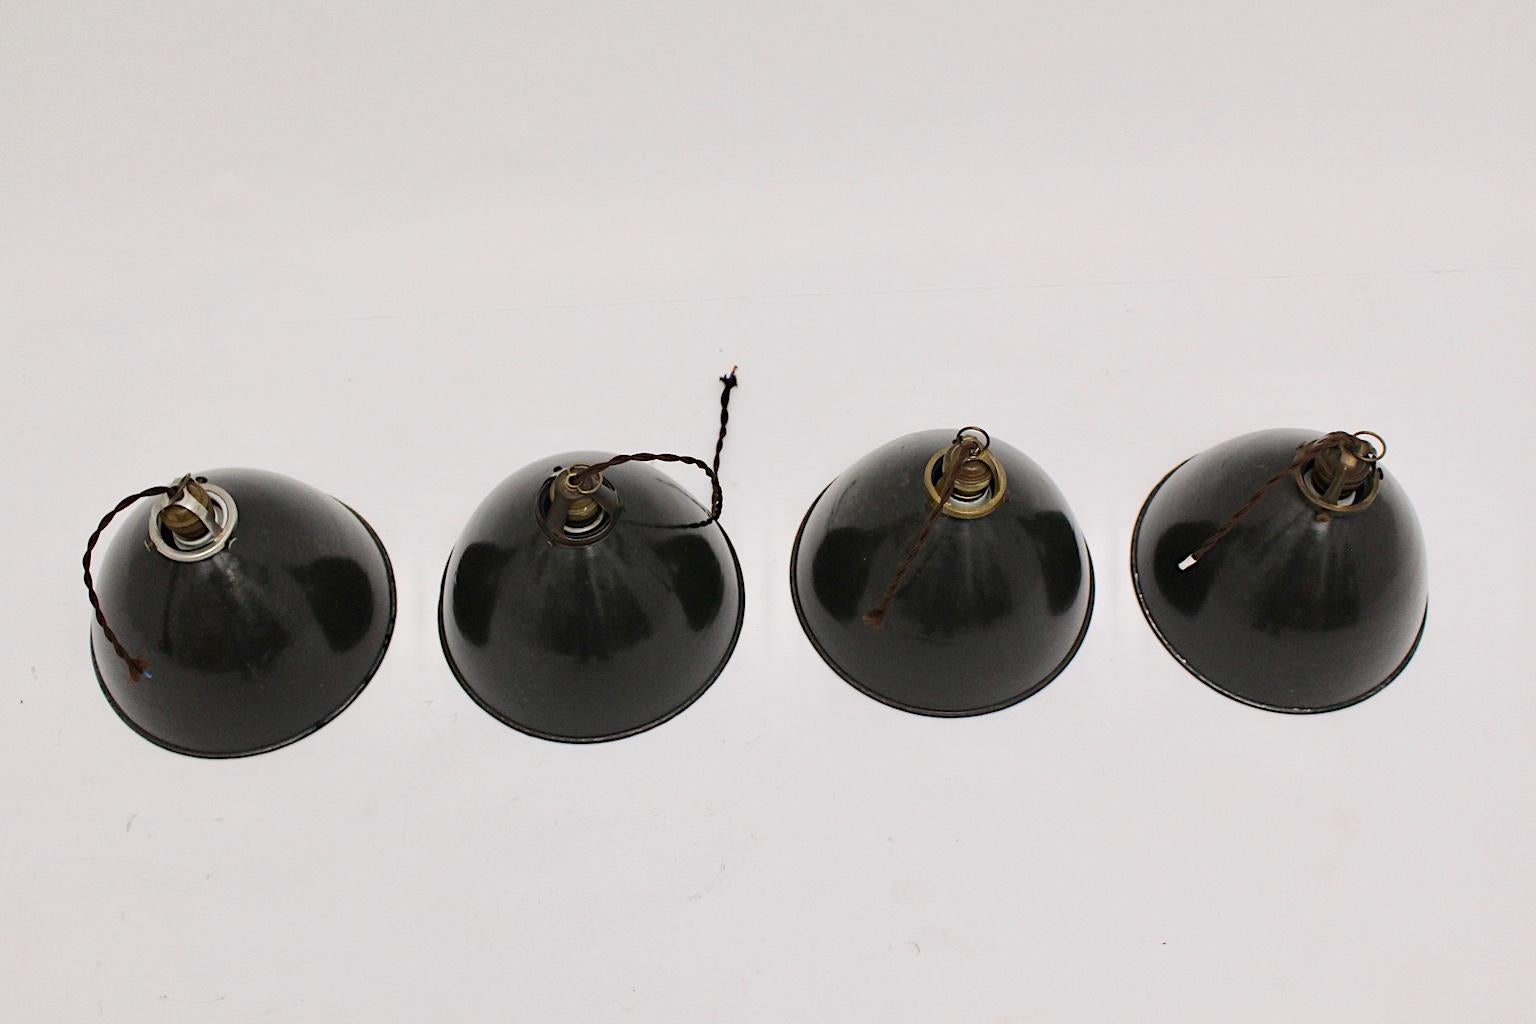 Bauhaus Black and White Vintage Set of four Email Hanging Lamps, 1920s, Germany For Sale 1